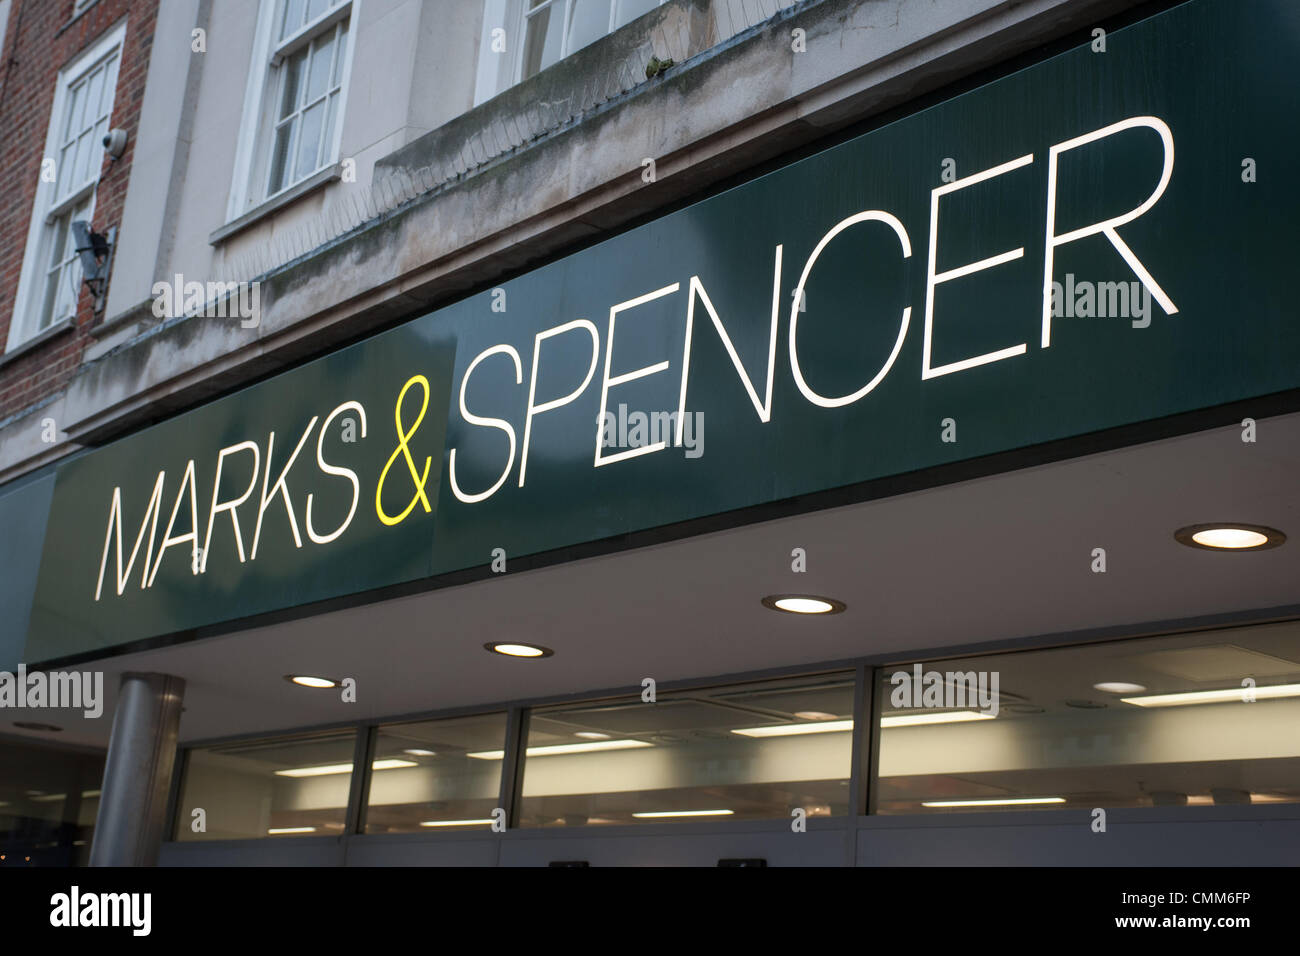 The sign of the Marks and Spencer (also known as M&S) store in Worthing ...